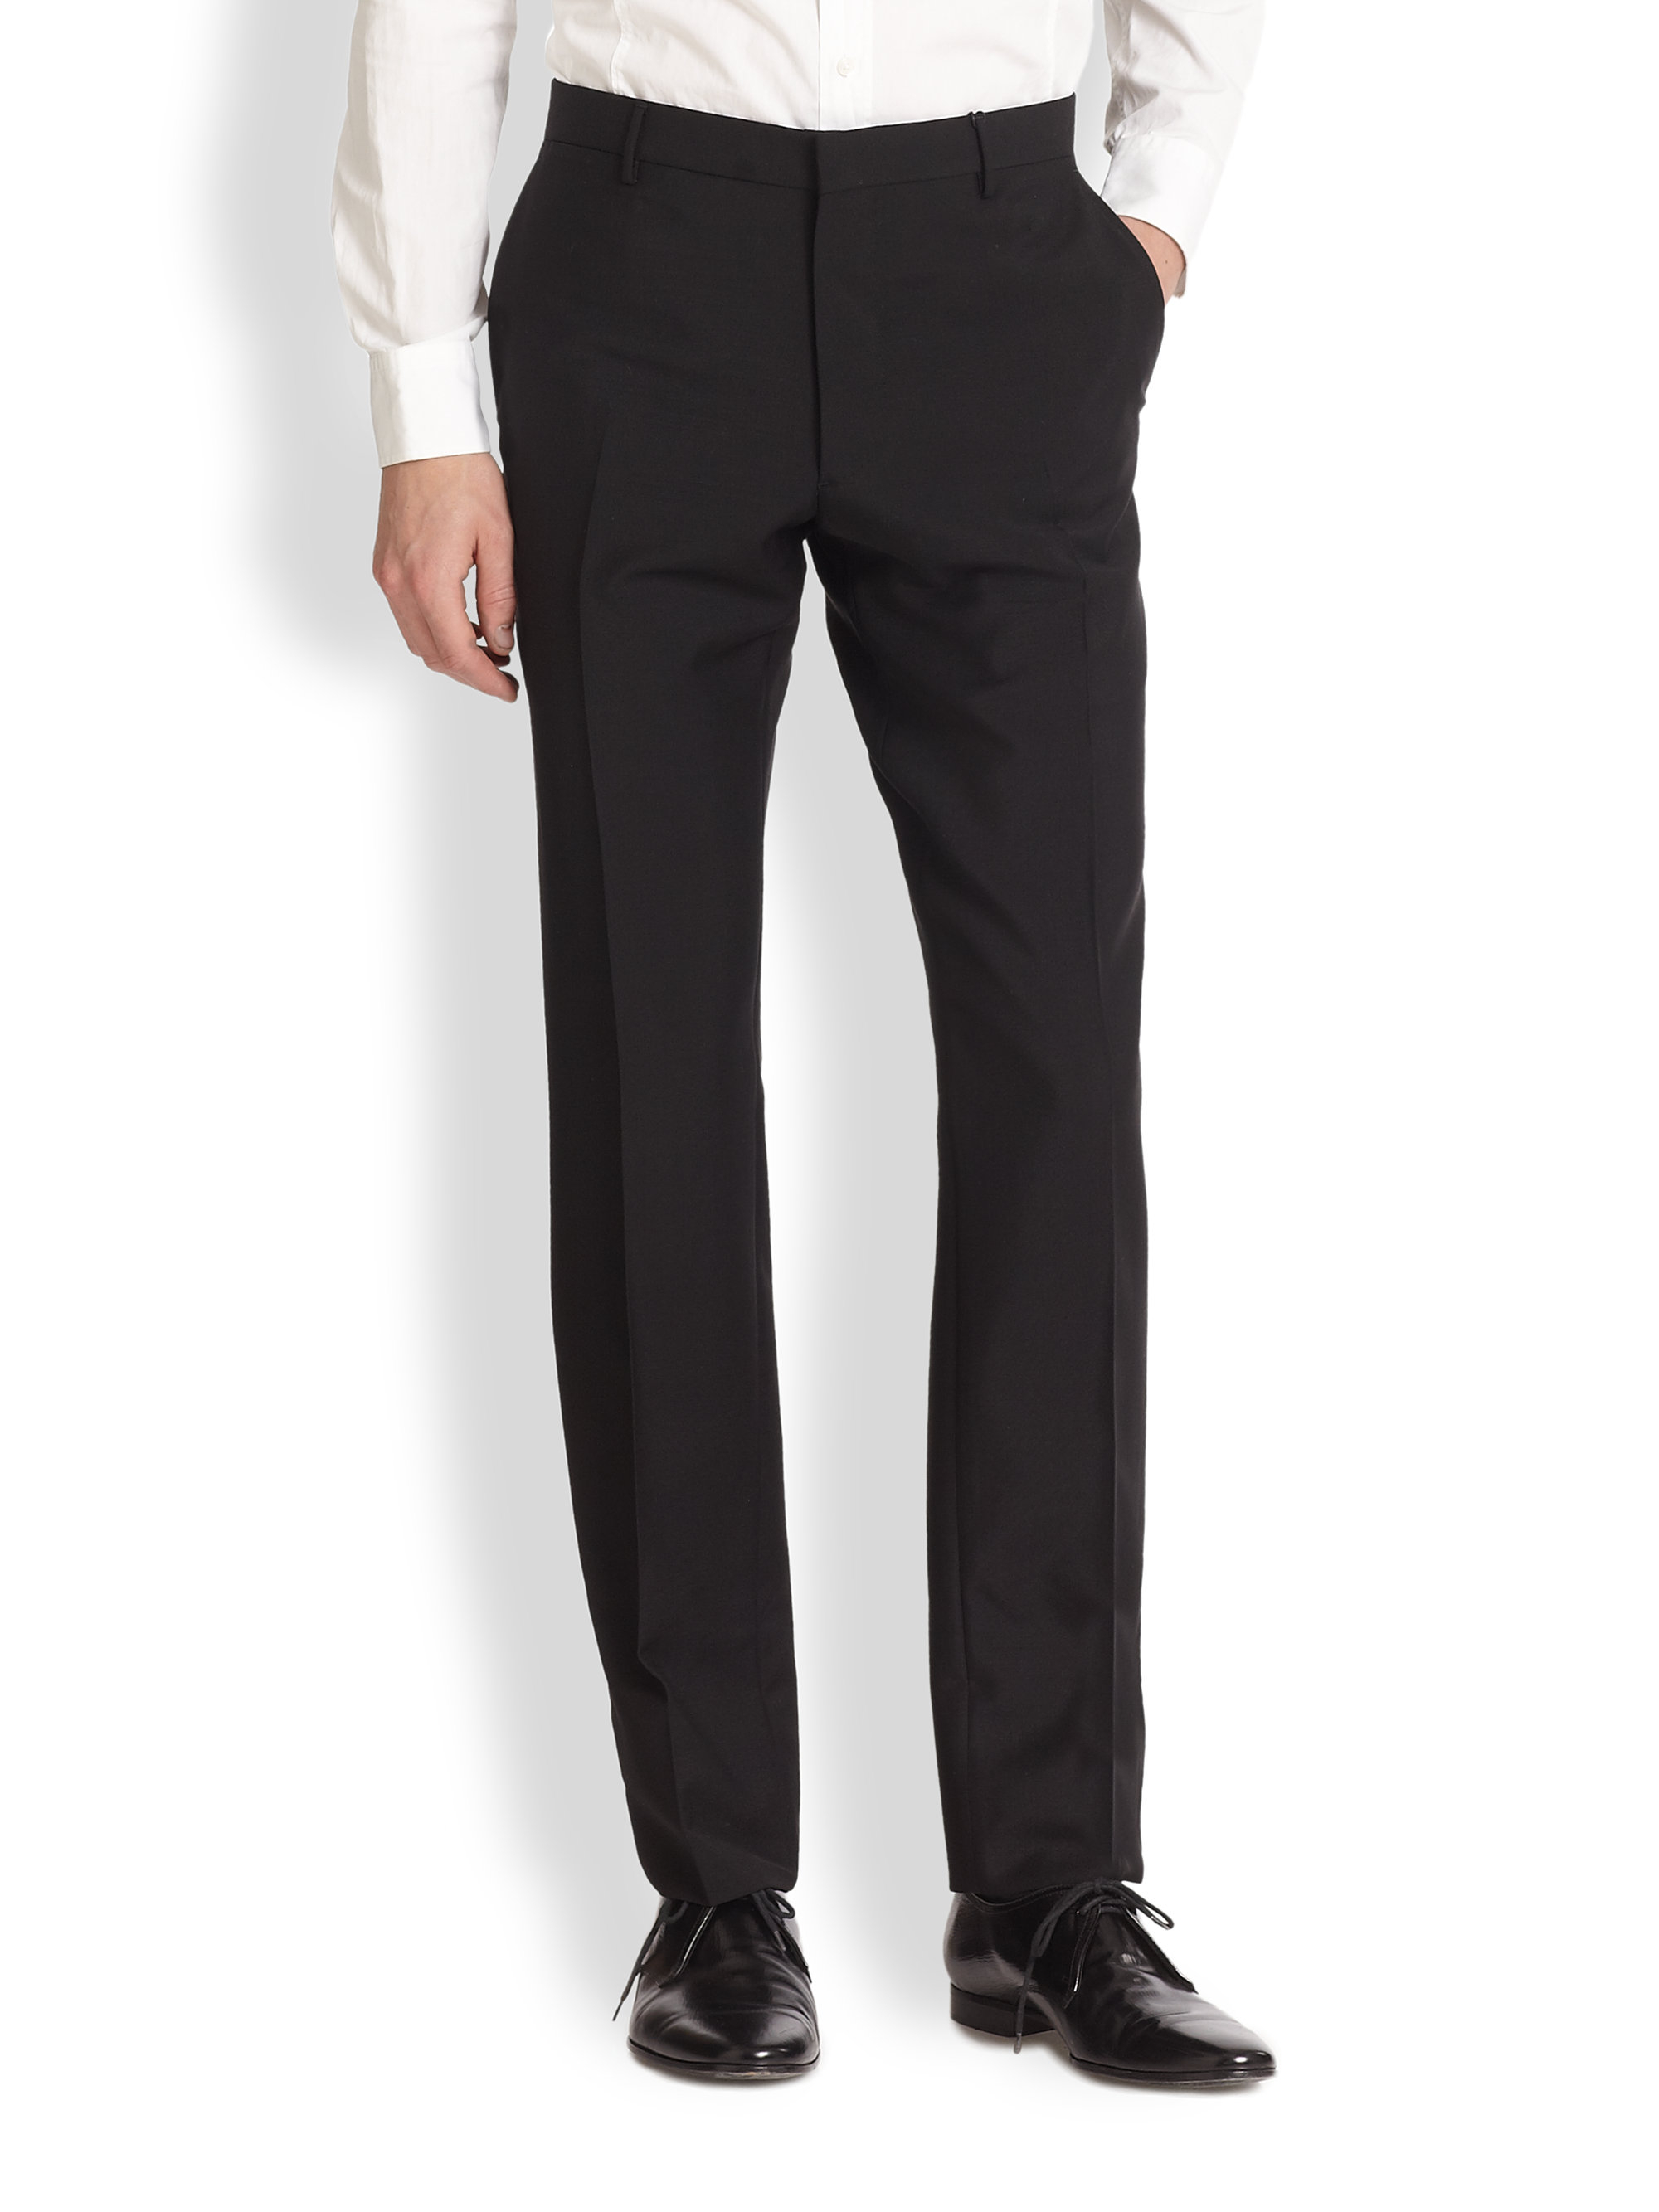 Burberry Millbank Mohair Trousers in Black for Men - Lyst